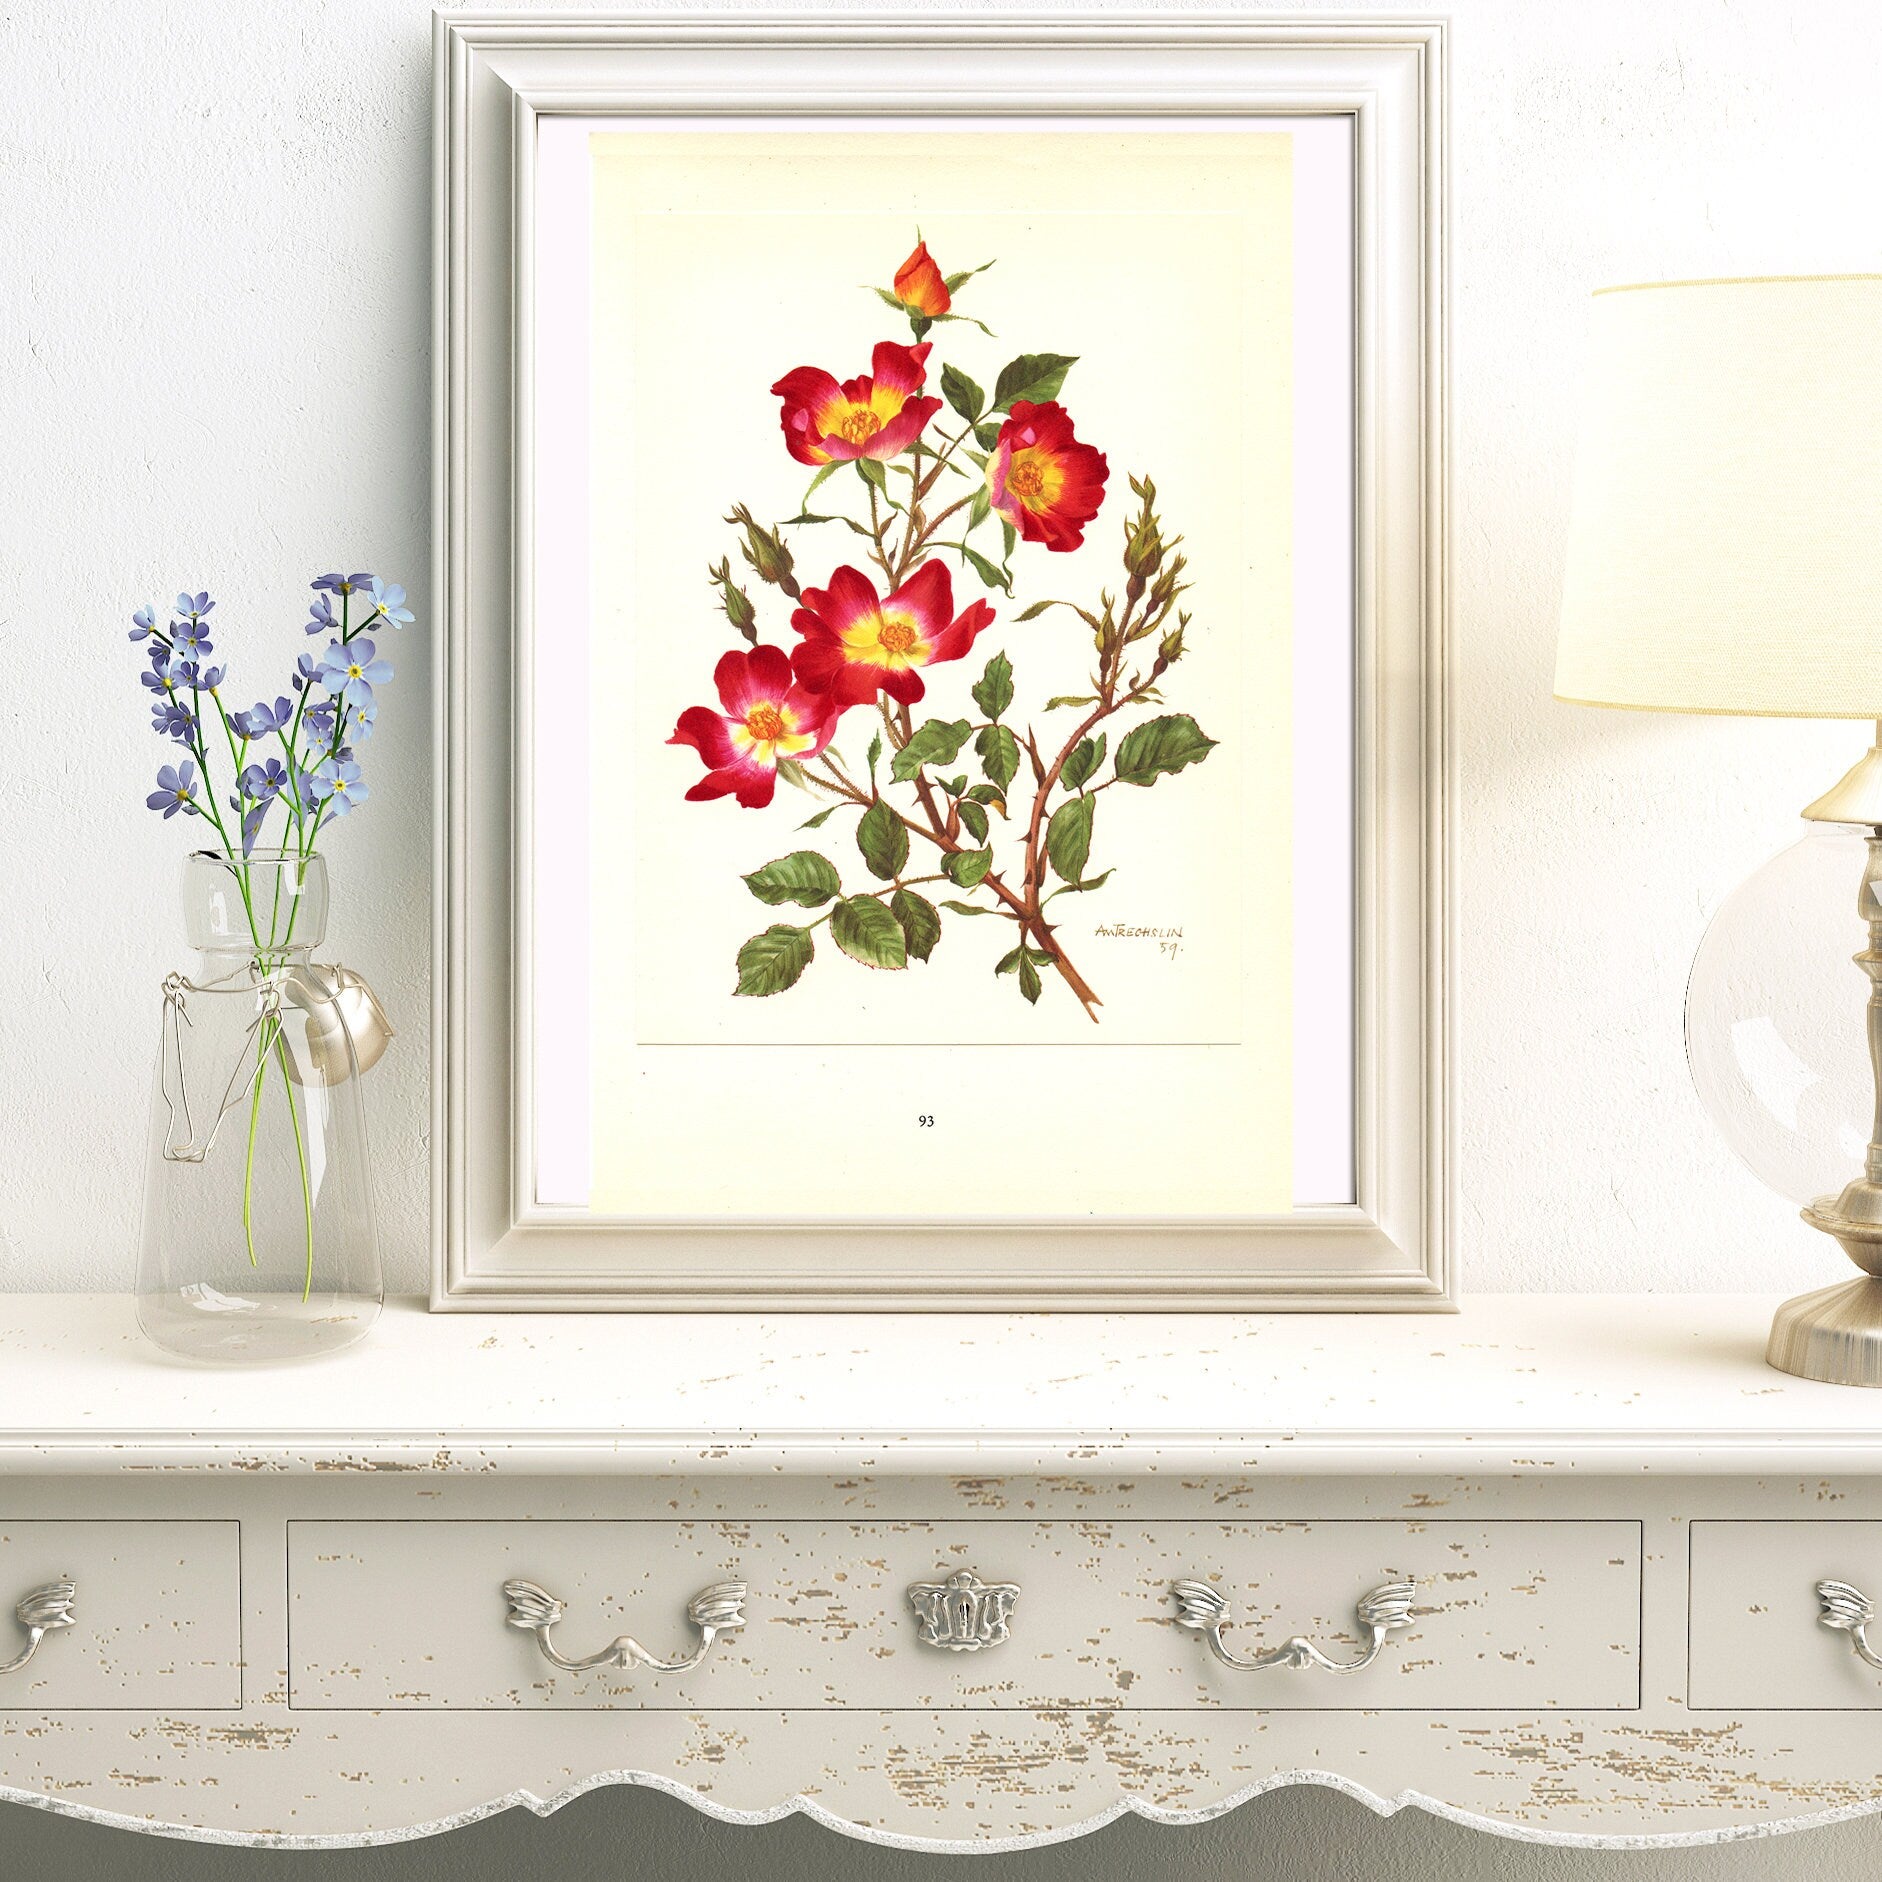 1962 Cocktail bicolor Red & yellow Rose flower art. Vintage Botanical art. French country decor. Botanical poster. Small Rose poster